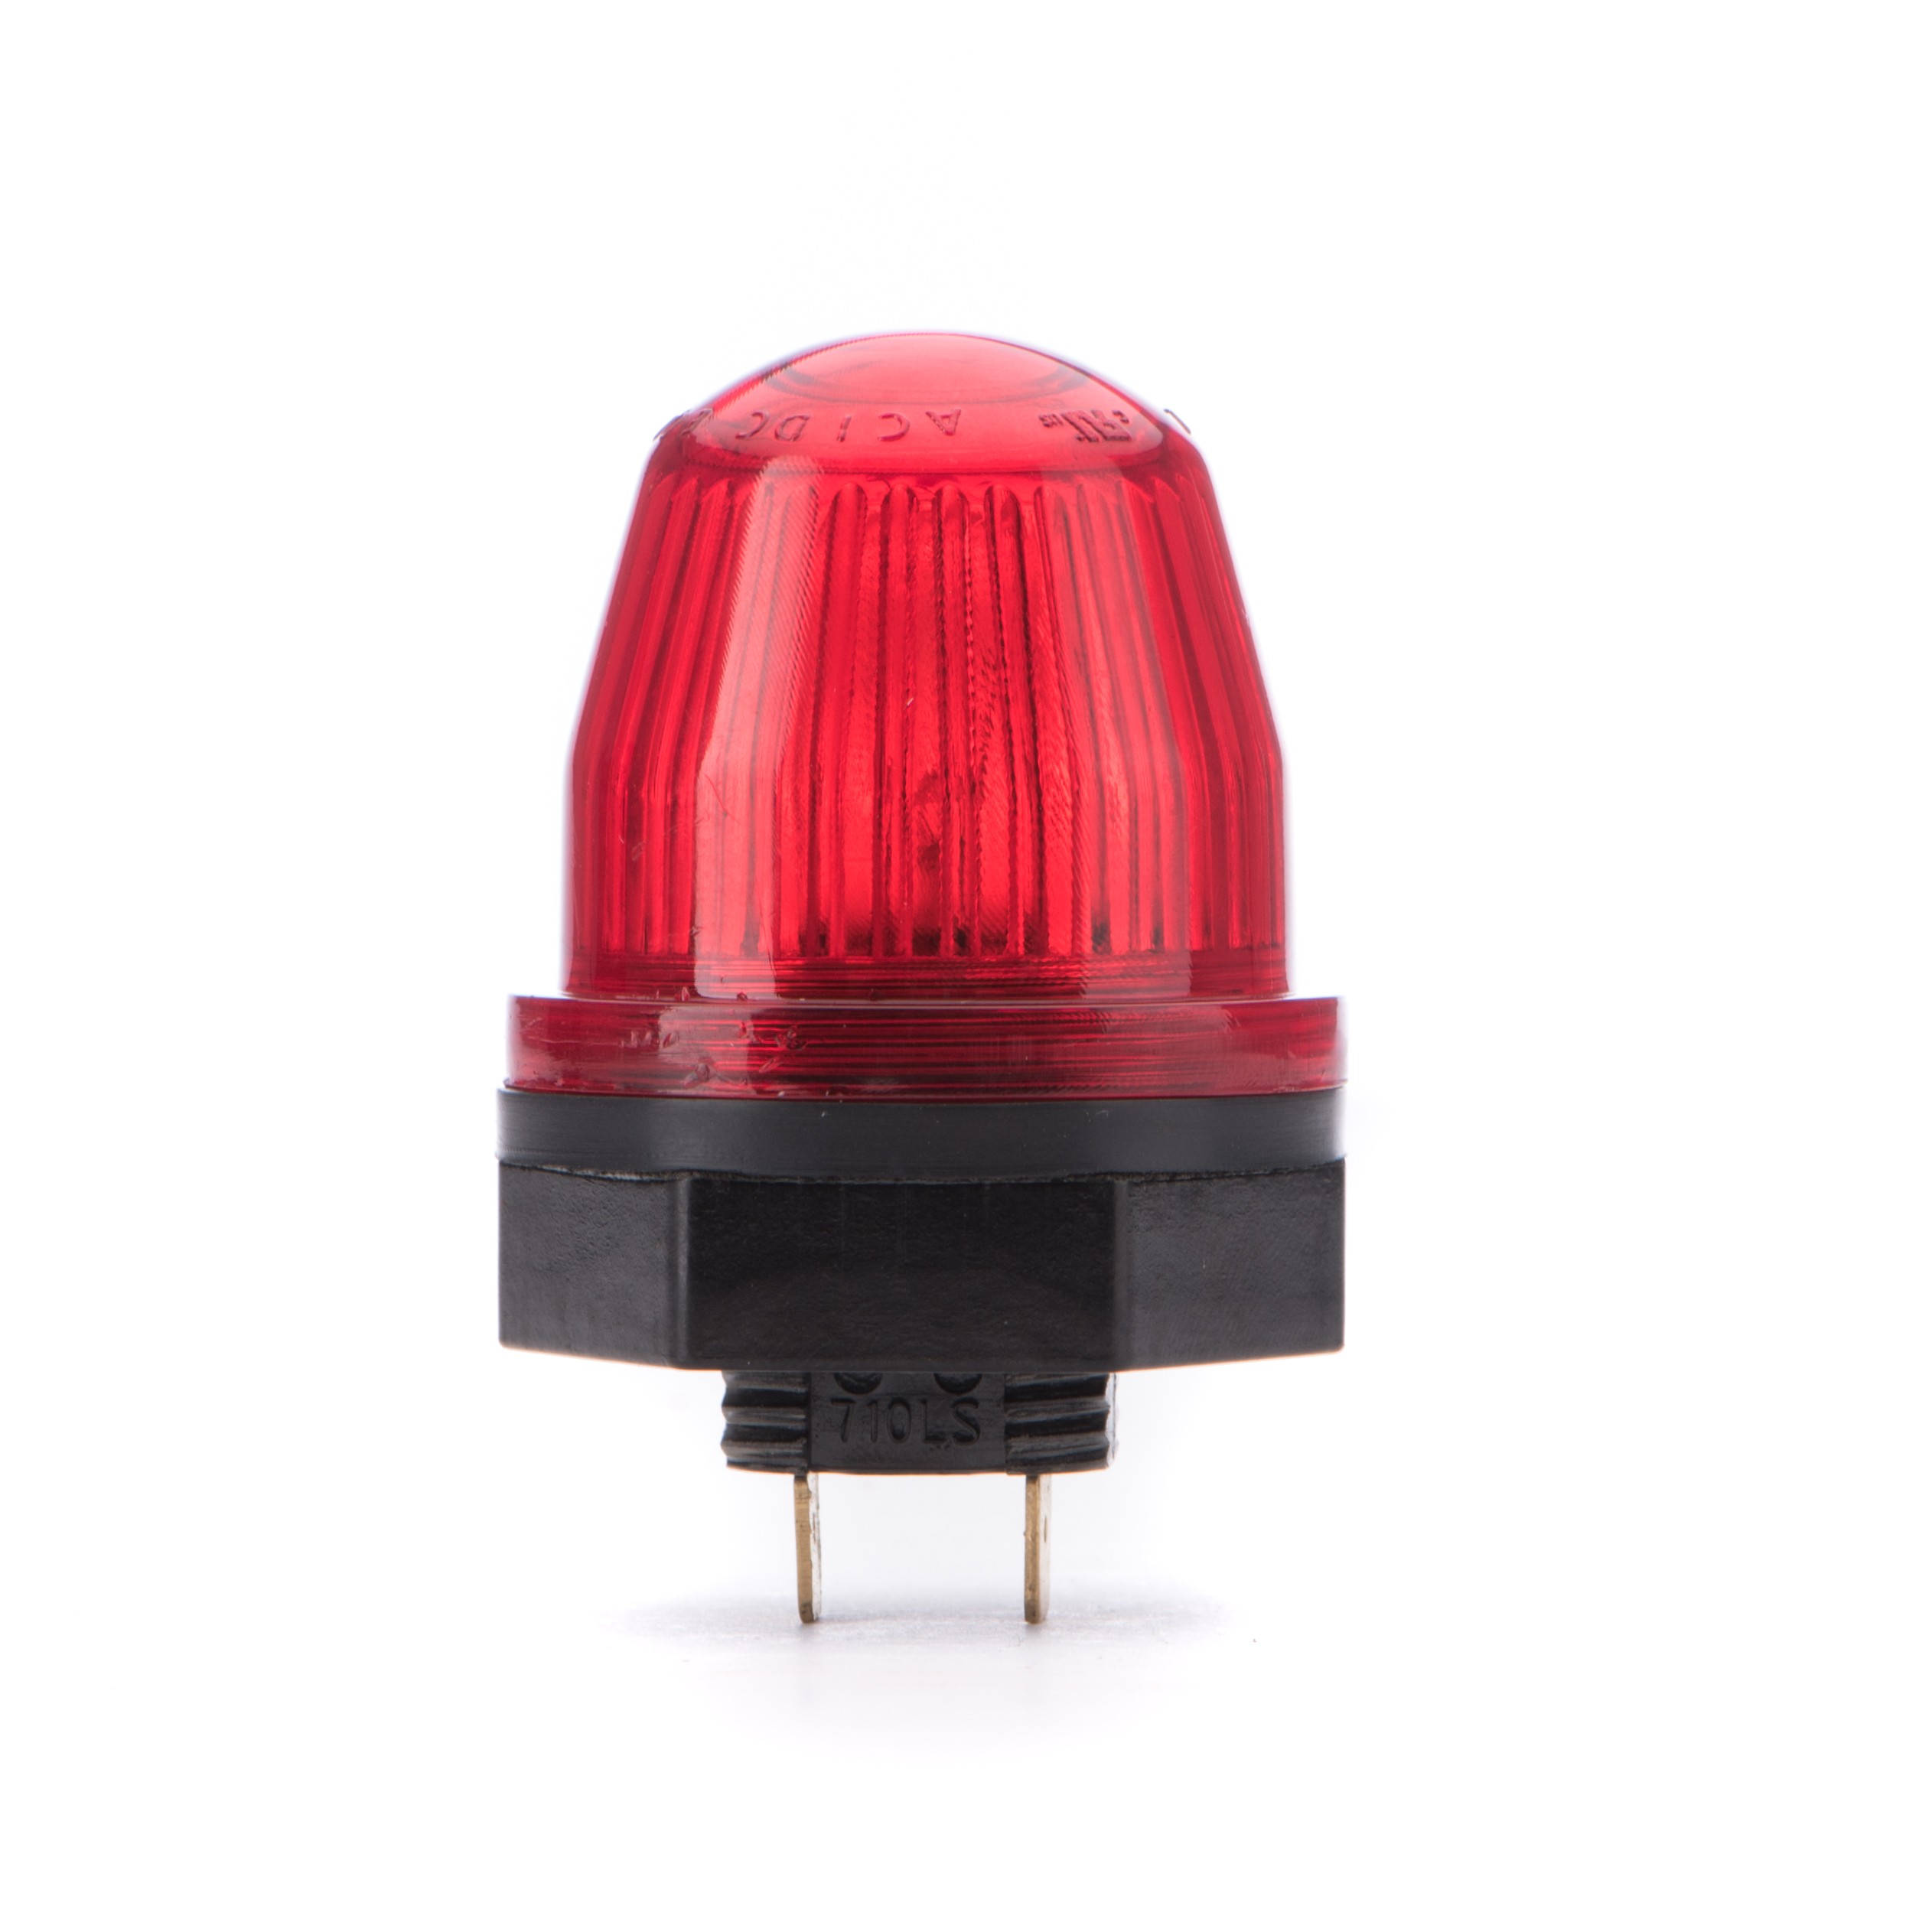 Red Alarm Light Assembly For Control Panels